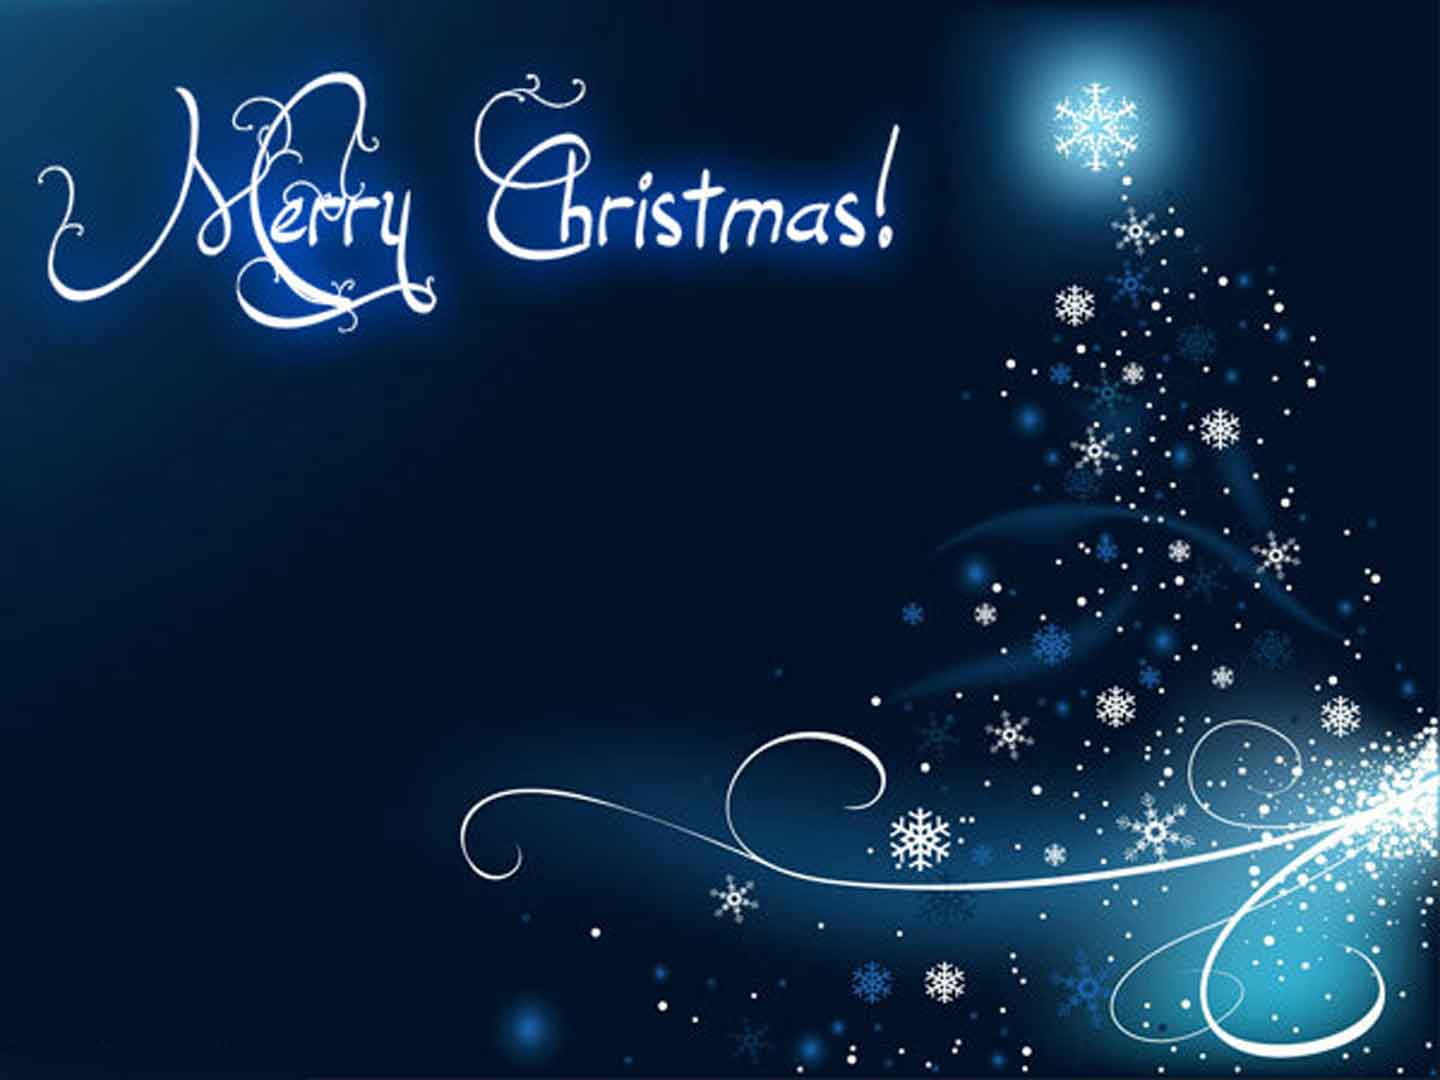 Merry Christmas Background. Free Internet Picture